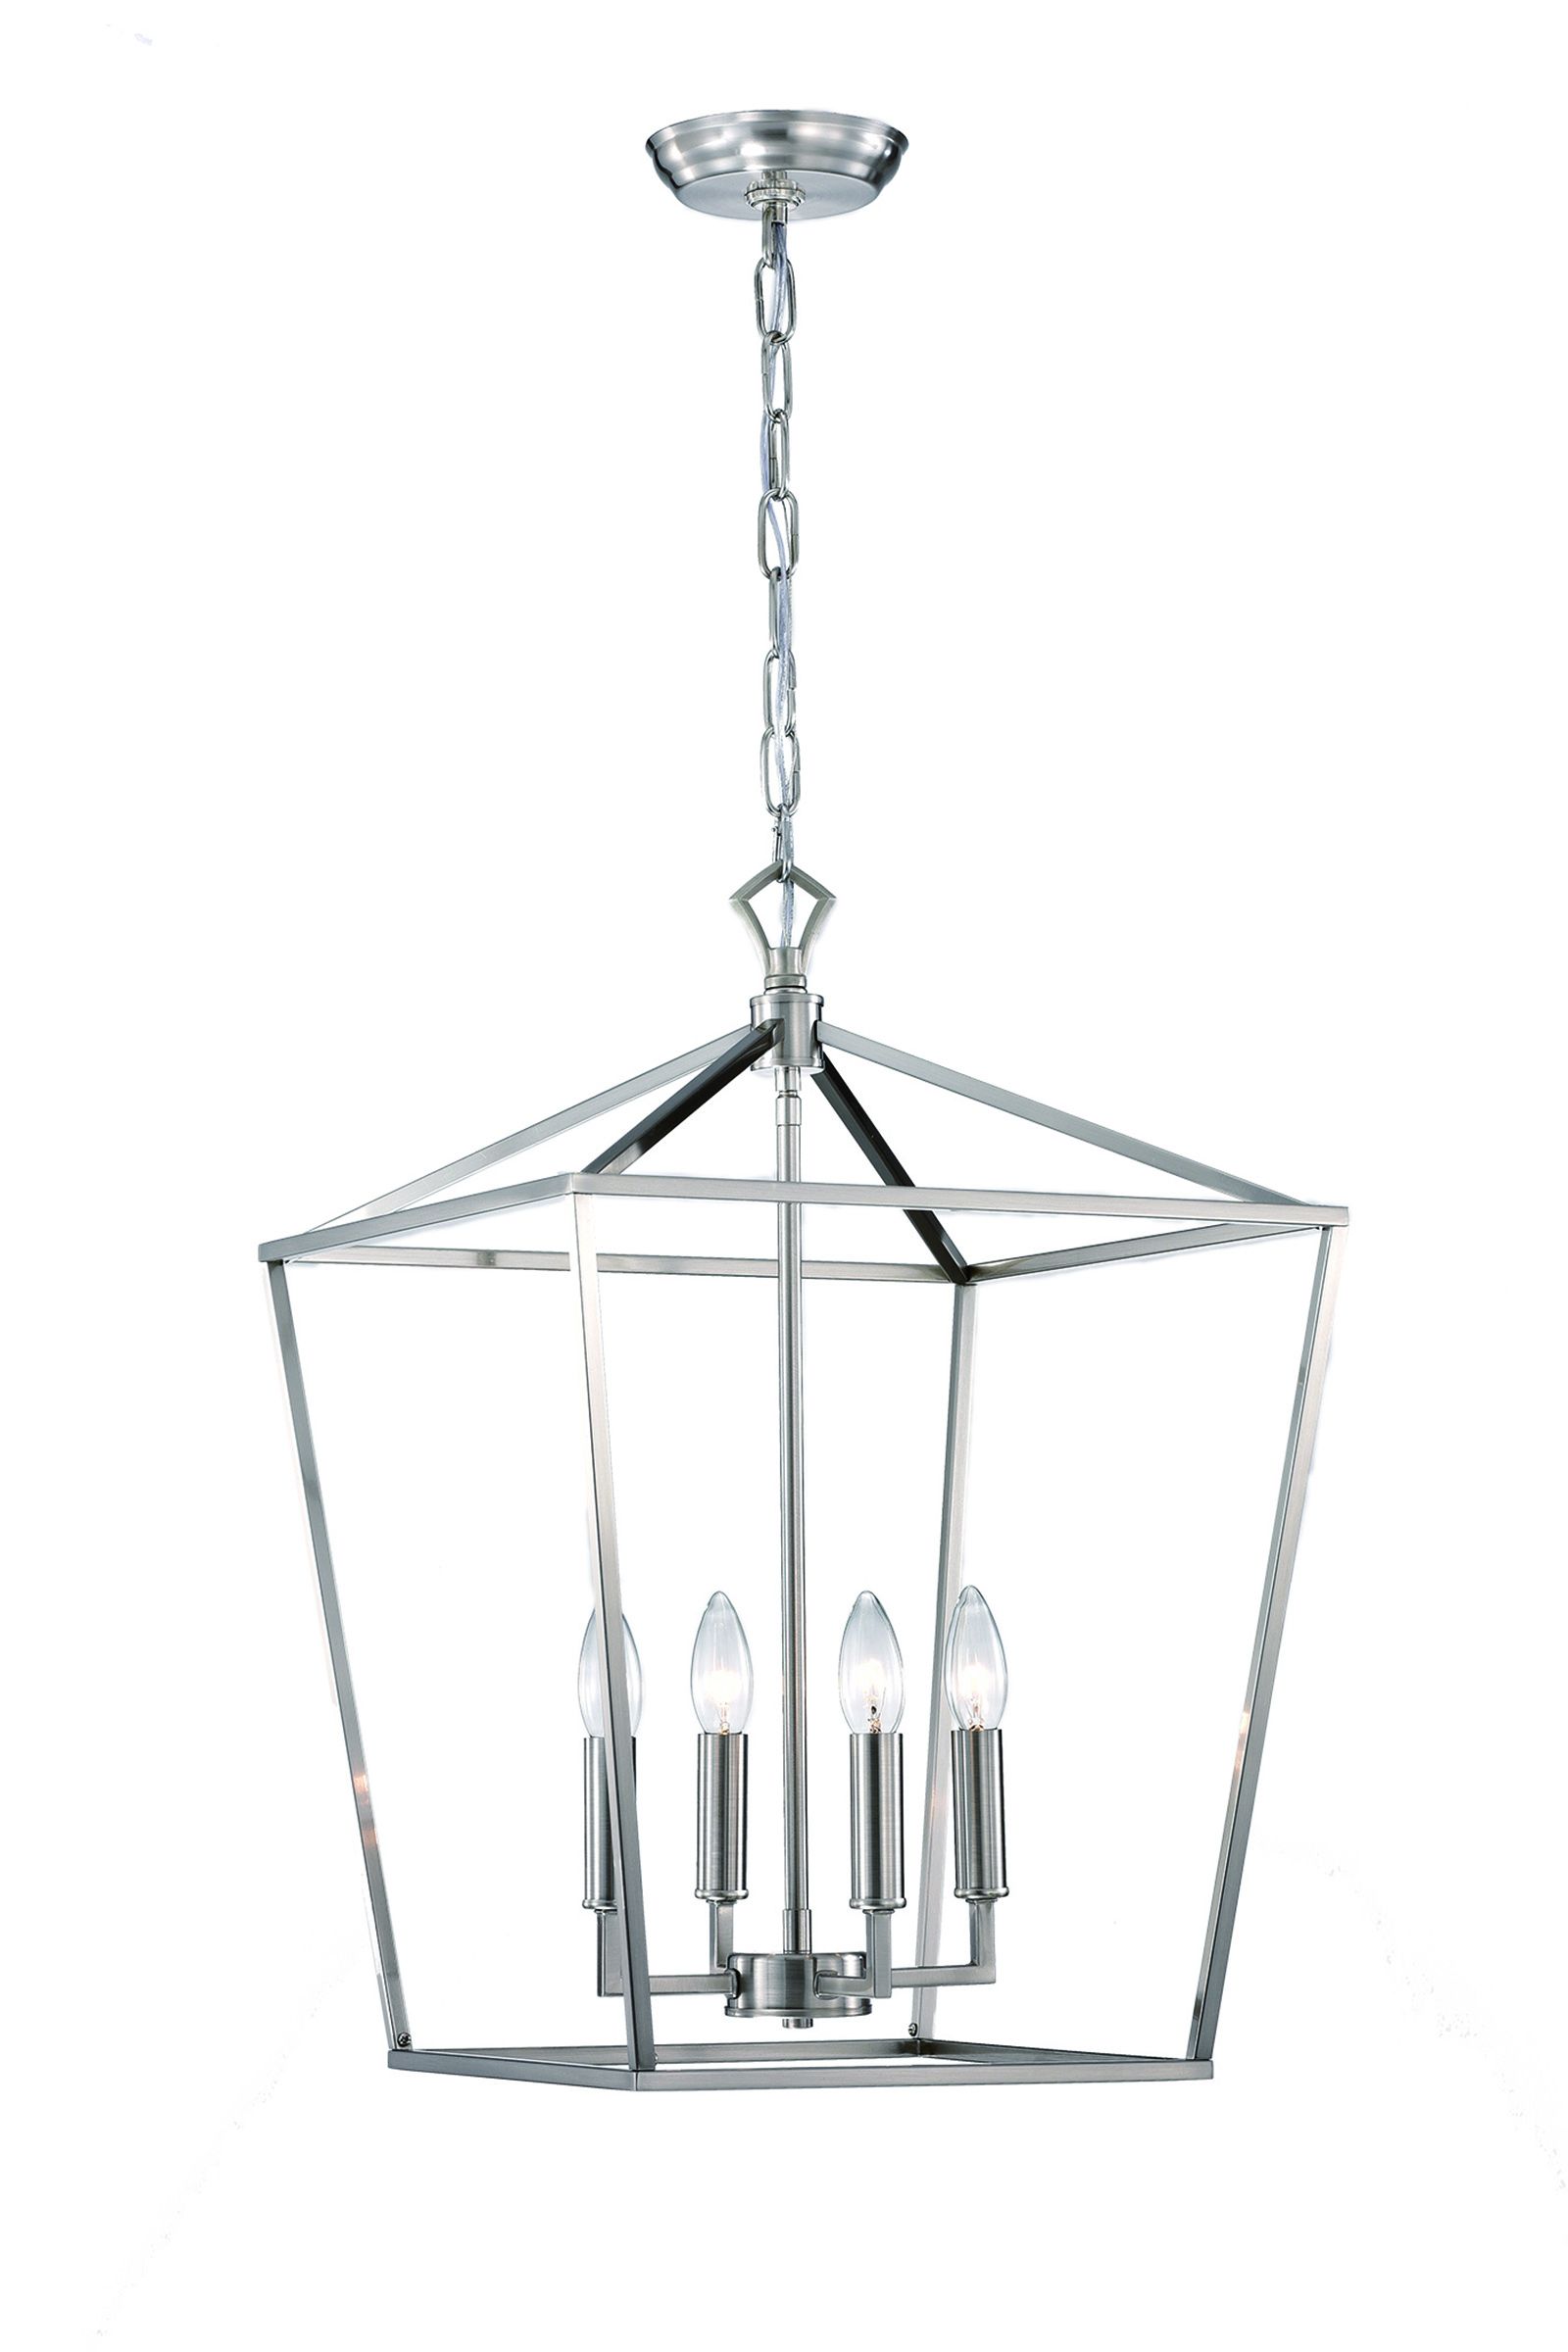 Famous Polished Nickel Lantern Chandeliers Intended For 4 Light Brushed Nickel Lantern Pendant Chandelier 16 In – Edvivi Lighting (View 9 of 10)